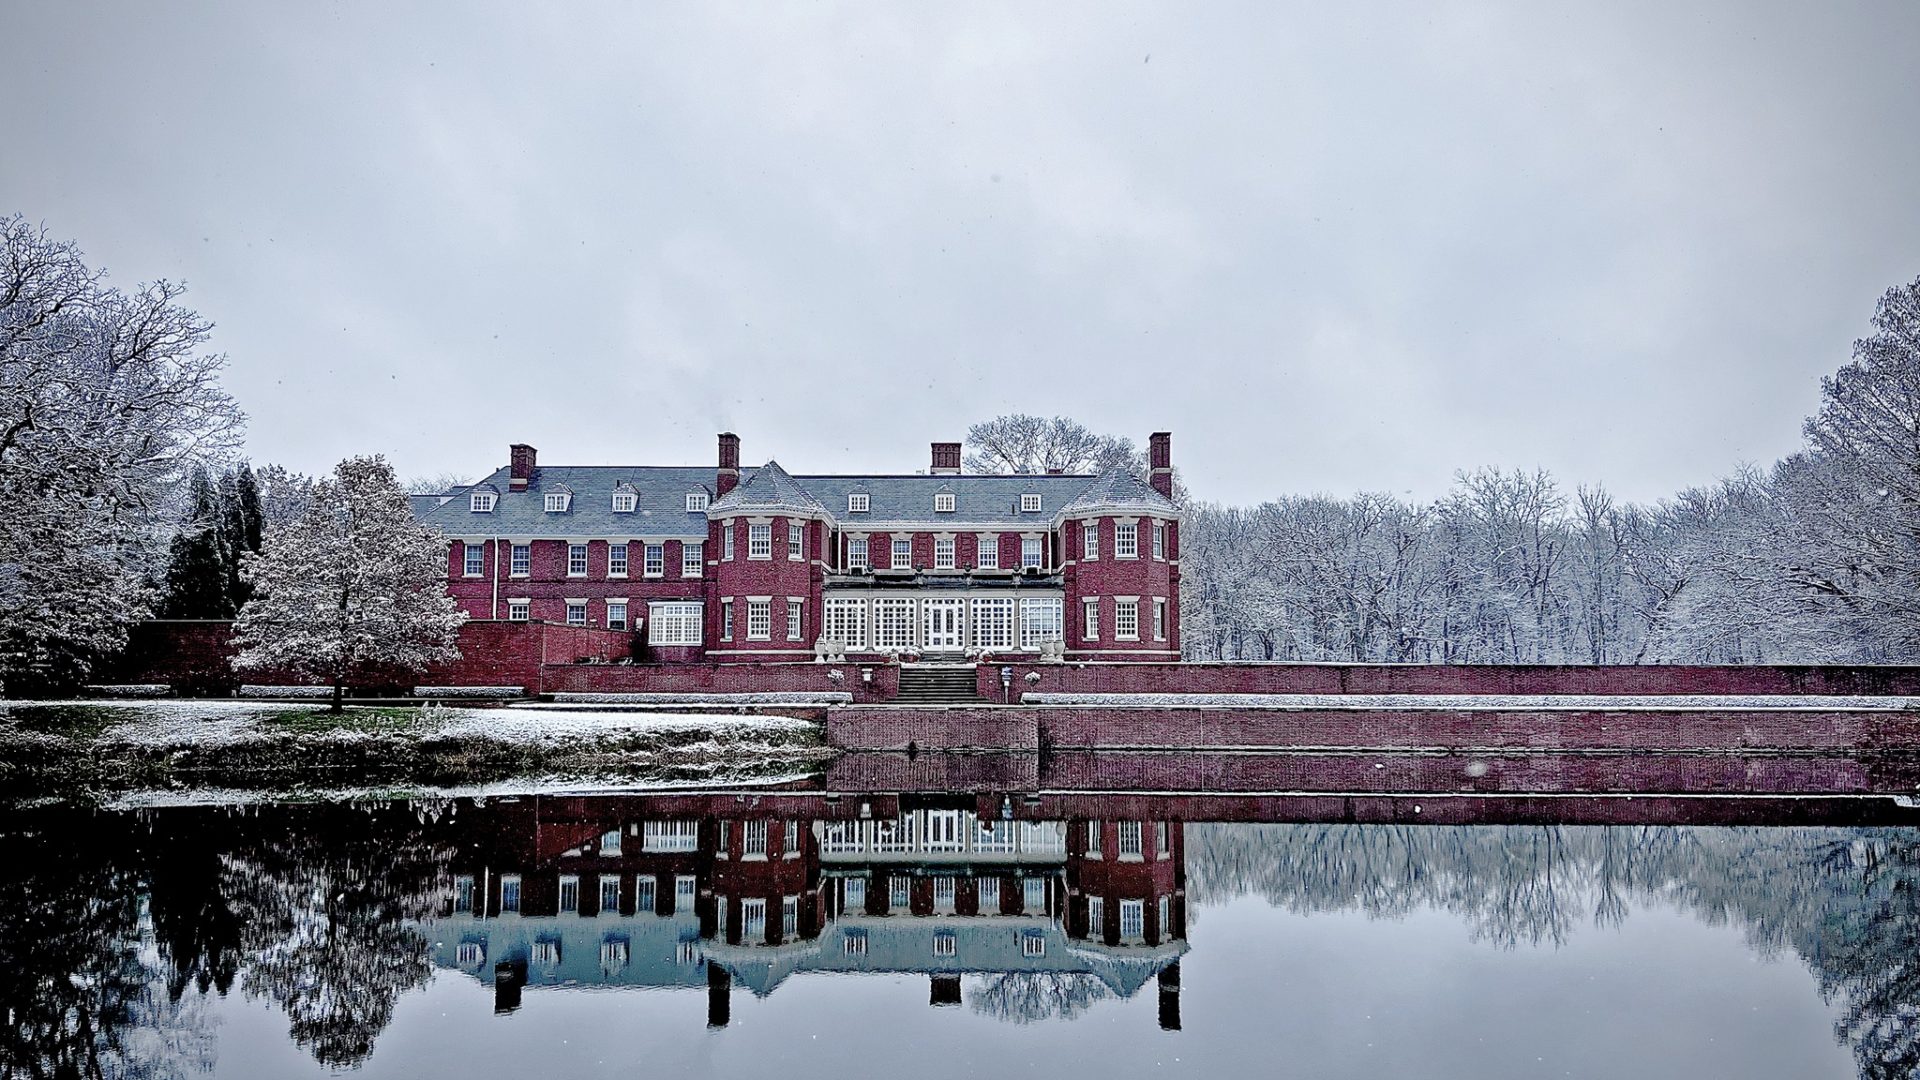 The Allerton Mansion: Red brick with two rows of rectangular windows. In the background are snow covered trees. In the foreground is a pond where you can see the mansion and trees reflected.